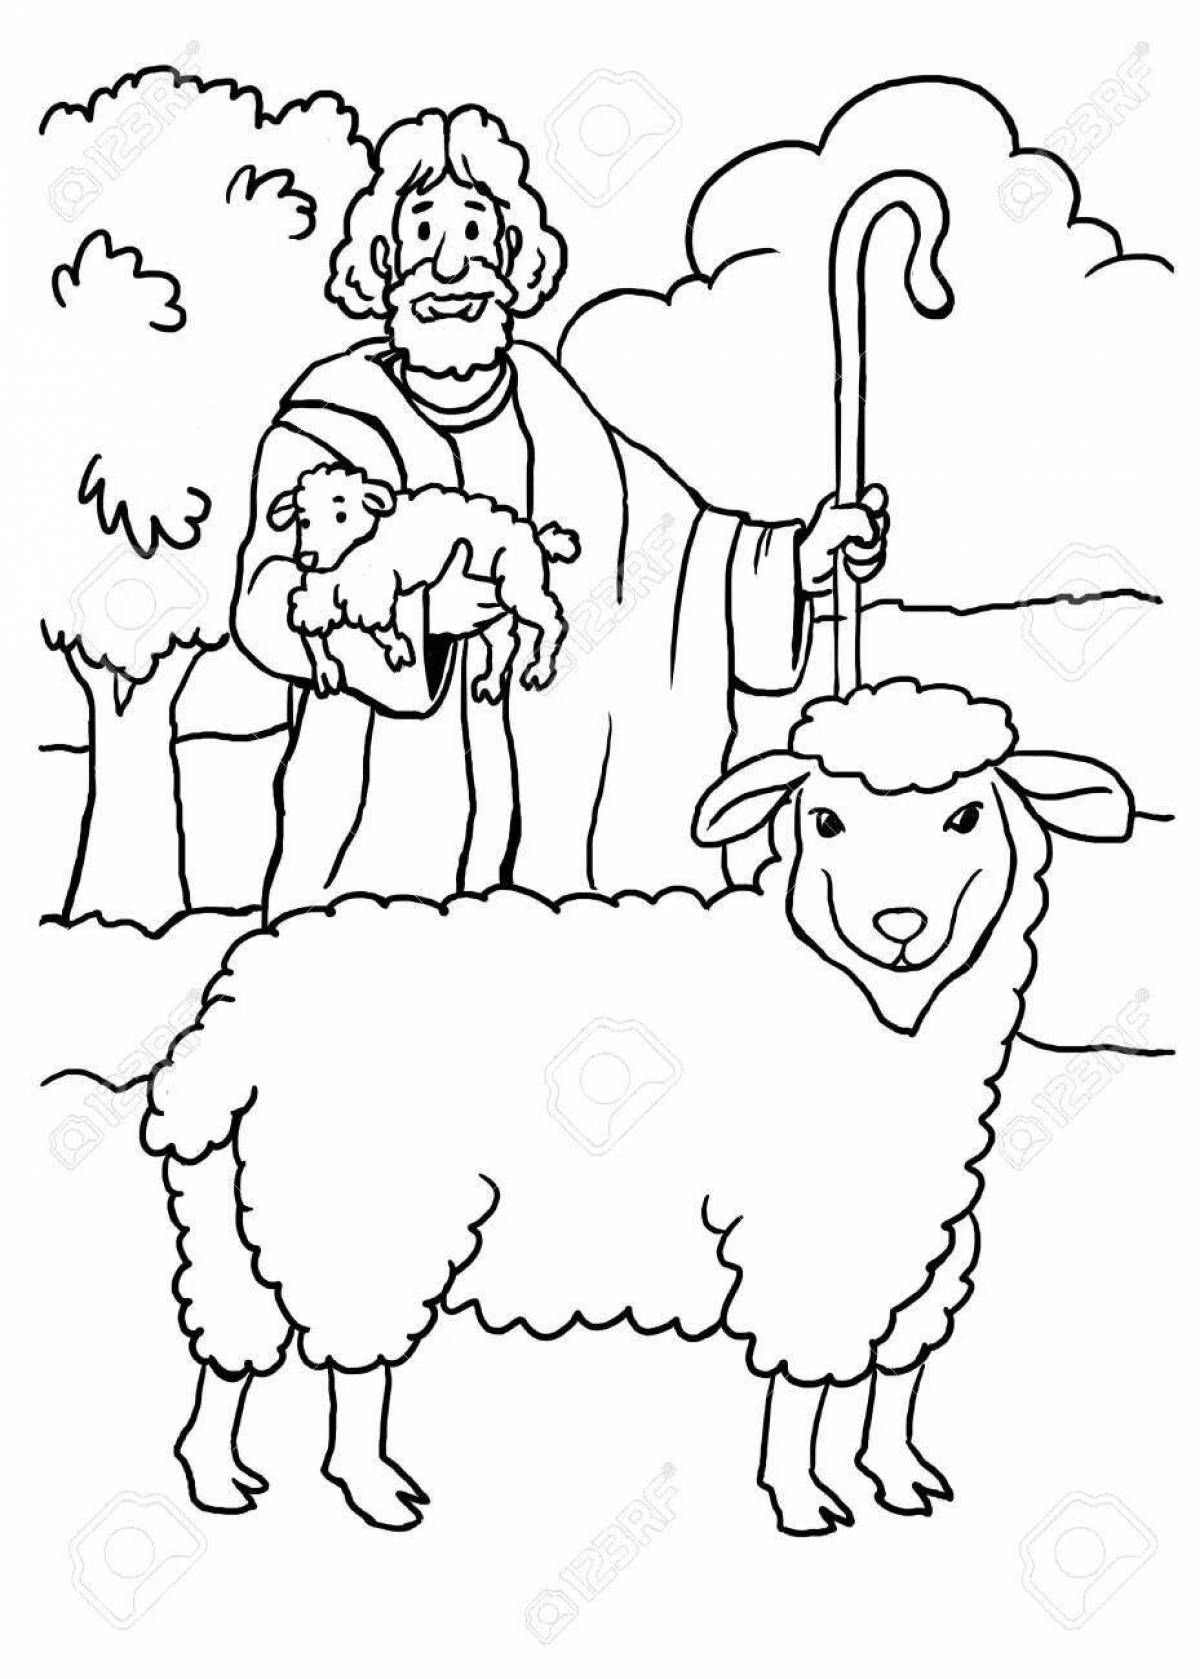 Crazy shepherd coloring page